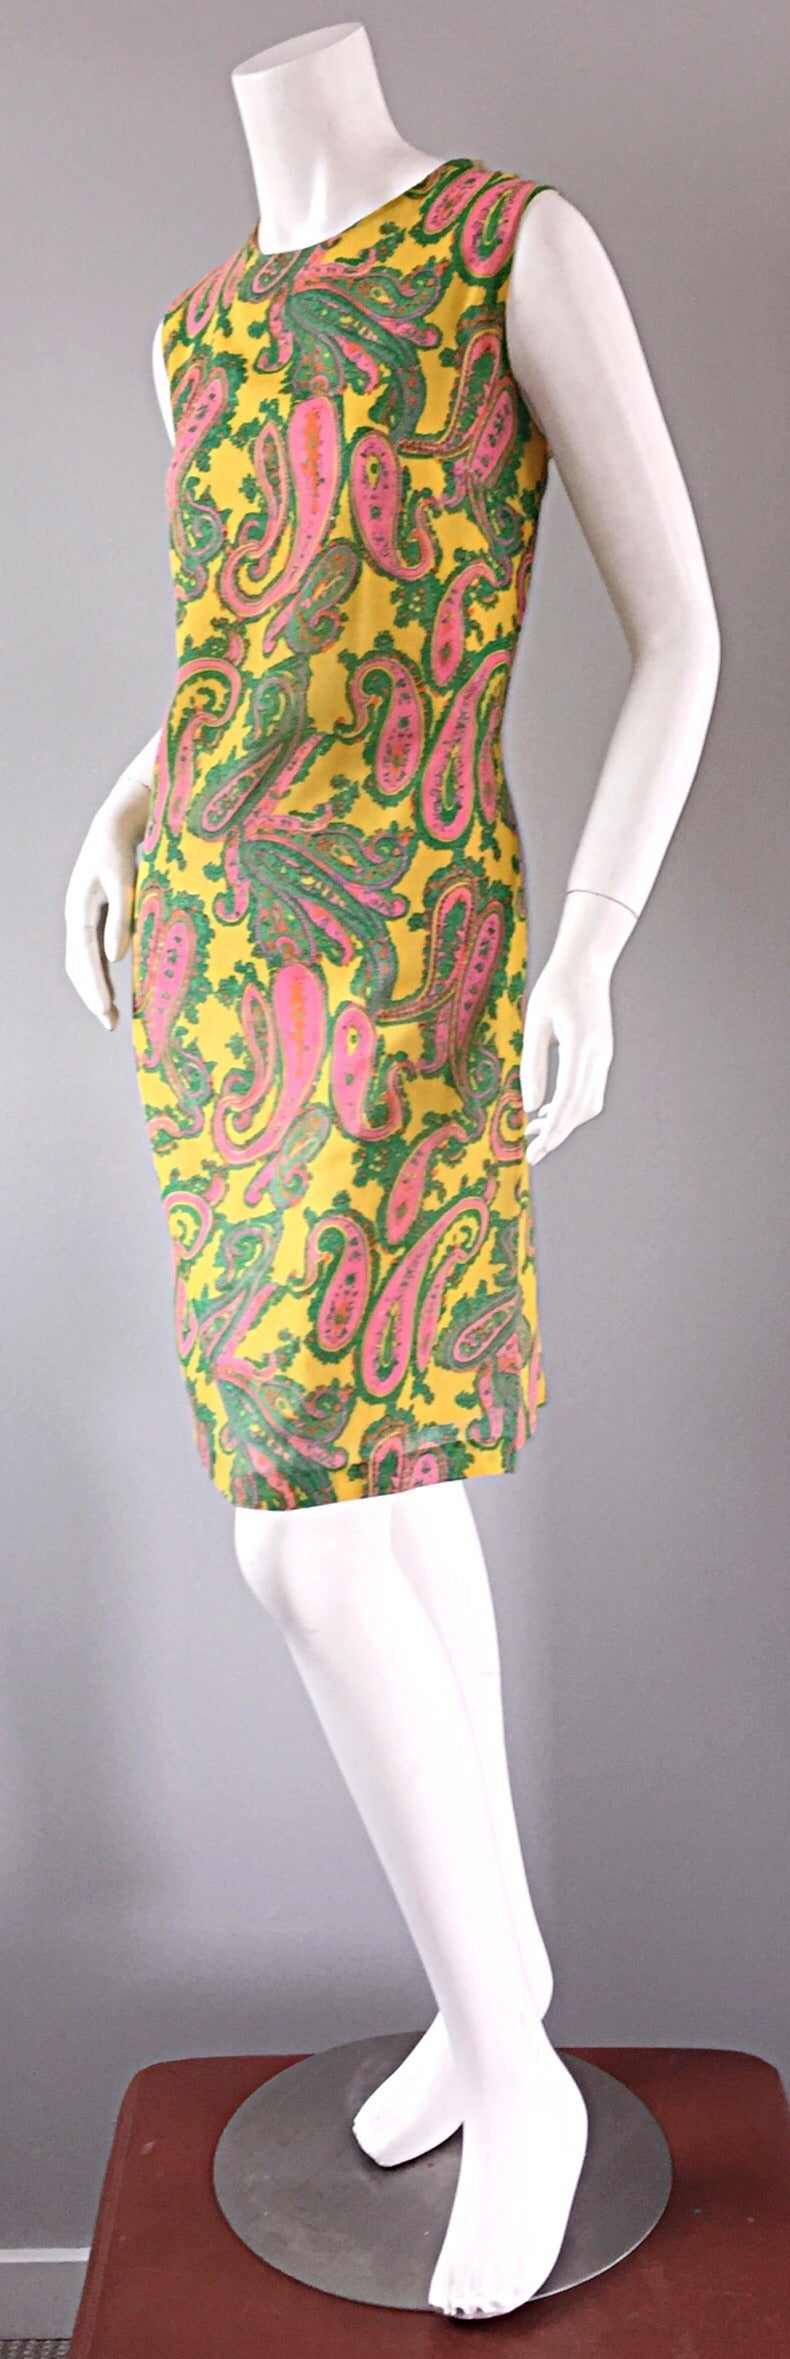 1960s Yellow  Large Size Pink Green Paisley Mod Retro Vintage Cotton Shift Dress In Excellent Condition For Sale In San Diego, CA